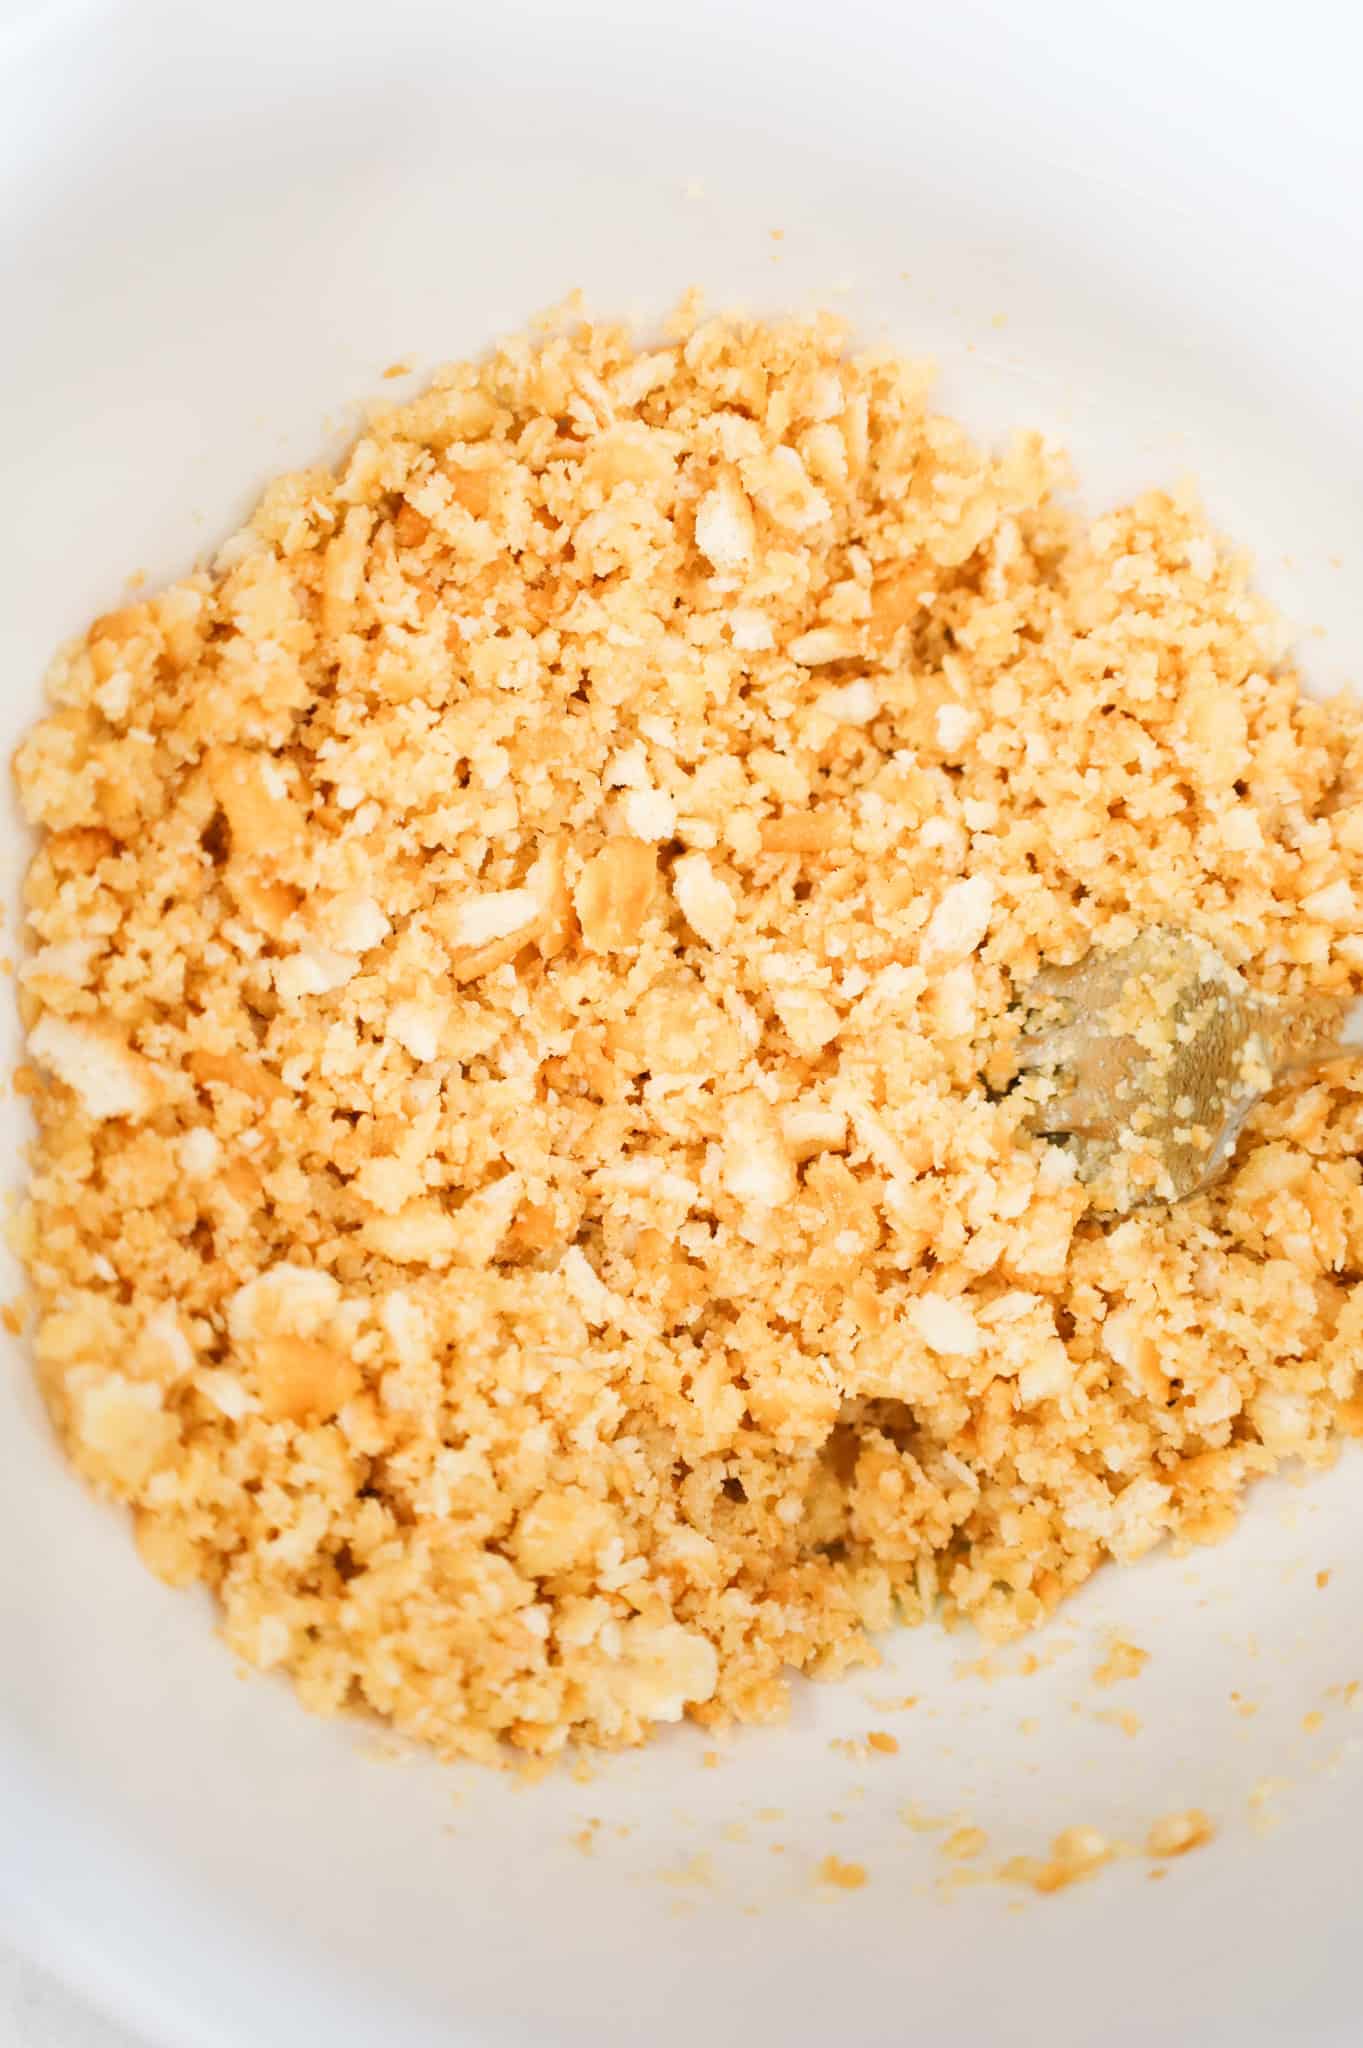 Ritz cracker crumb and butter mixture in a mixing bowl